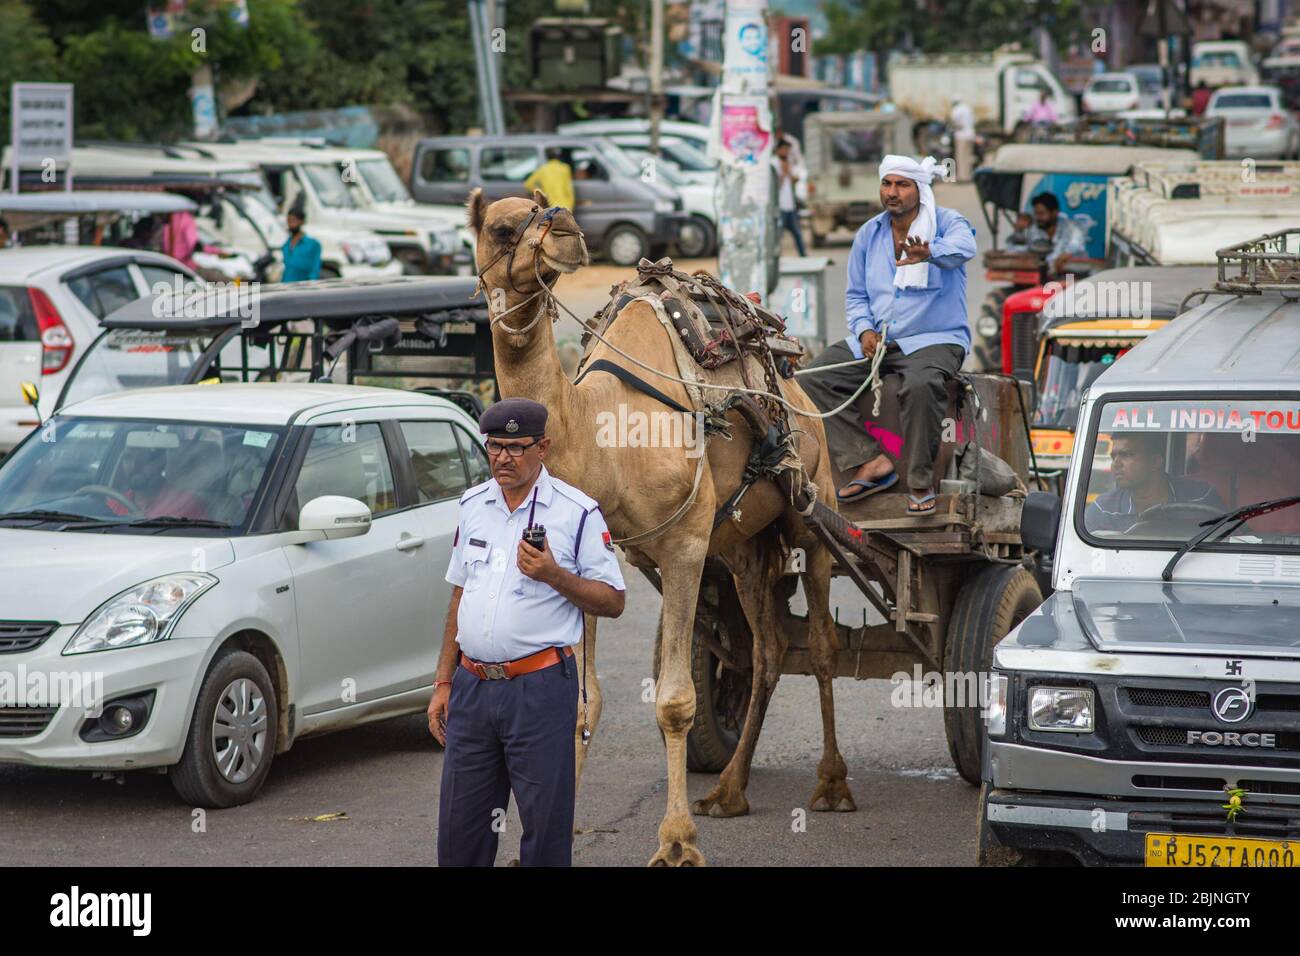 Jaipur, Rajasthan / India - September 28, 2019: Traffic police officer  directing traffic with cars and a Camel pulling cart, Jaipur, Rajasthan,  India Stock Photo - Alamy